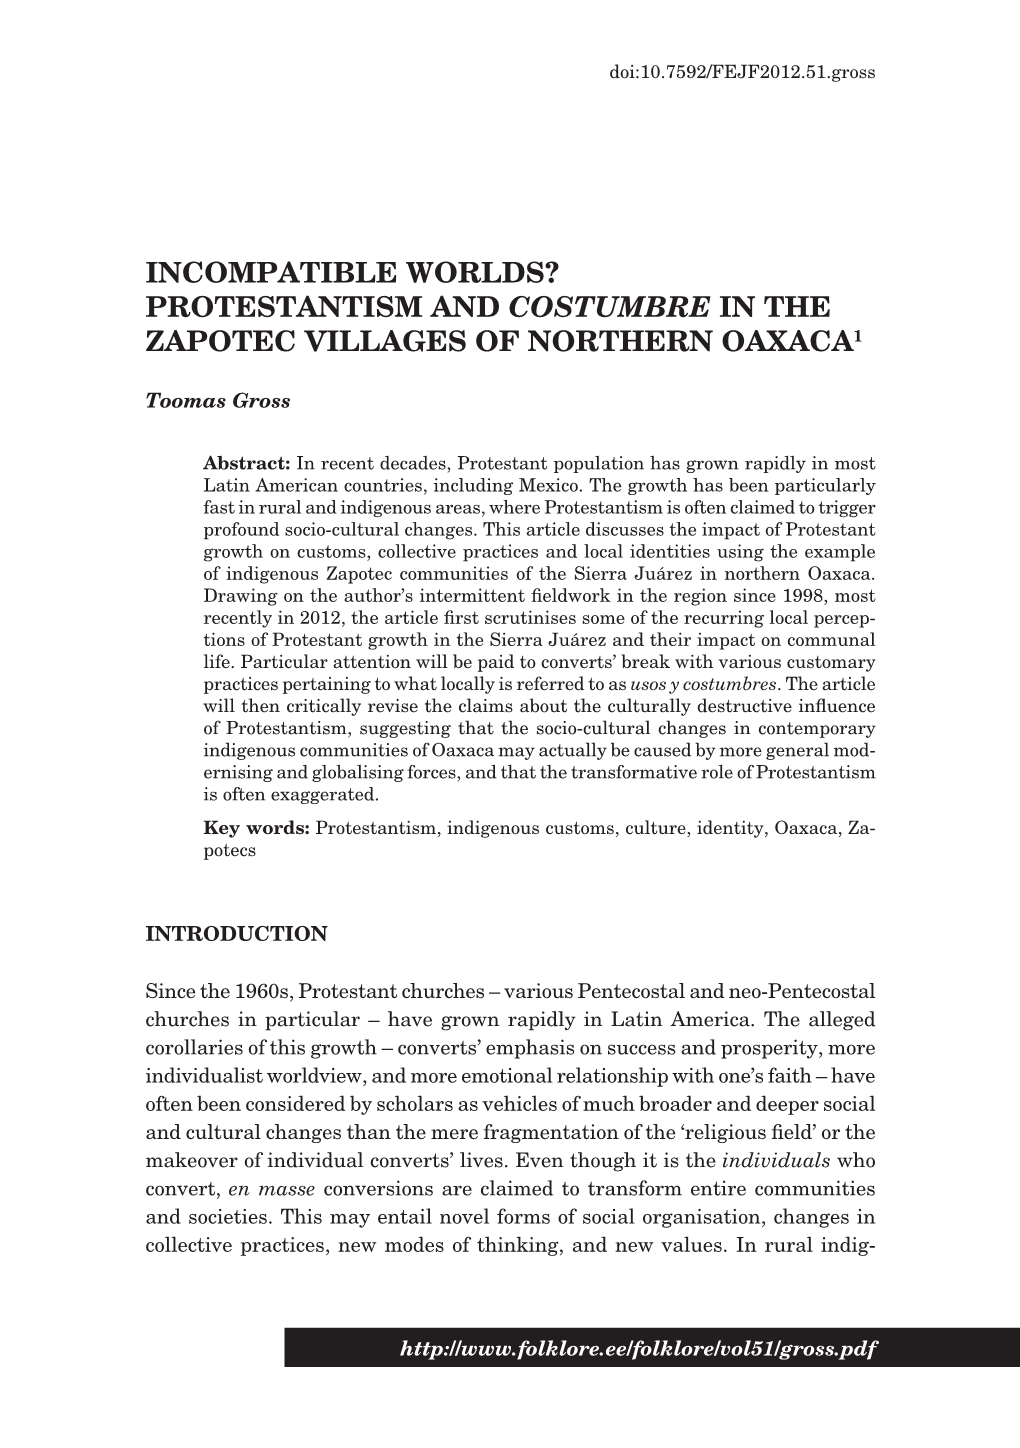 Incompatible Worlds? Protestantism and Costumbre in the Zapotec Villages of Northern Oaxaca1